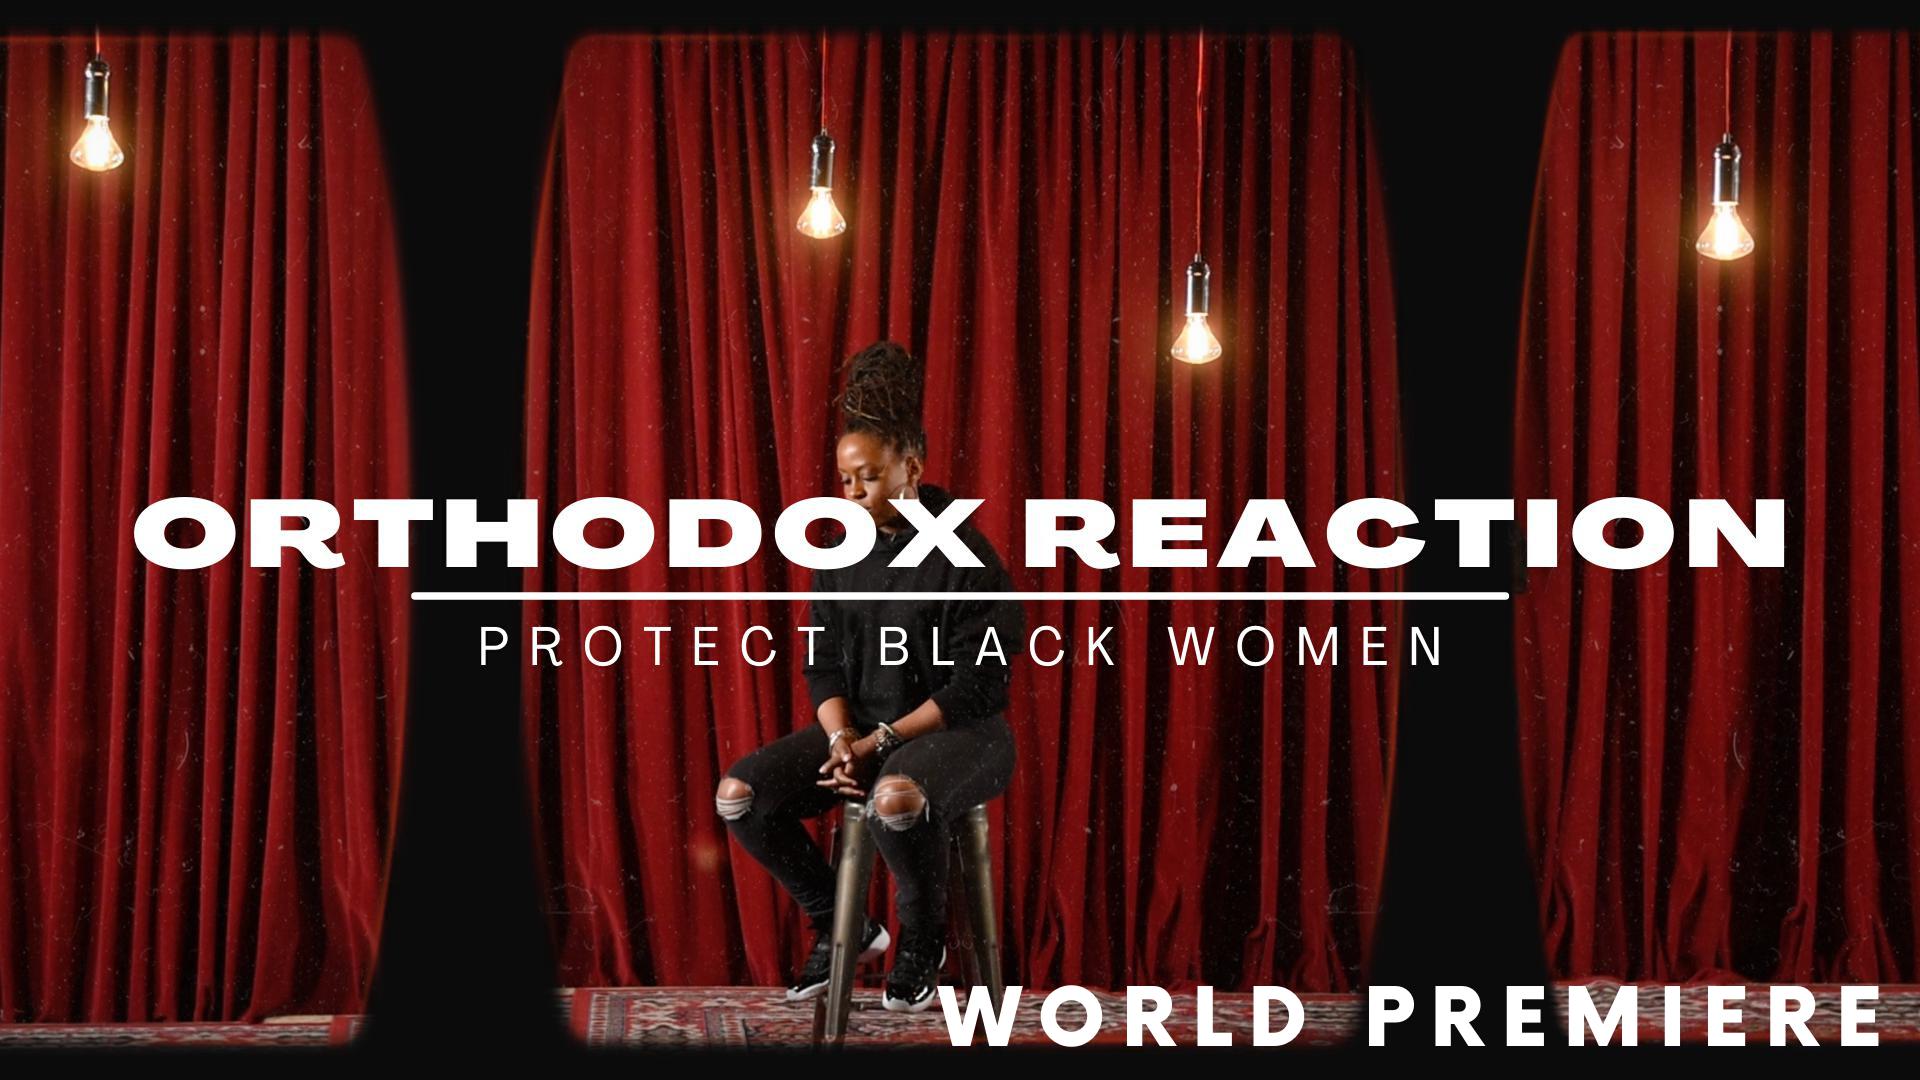 Orthodox Reaction: A Social Experiment - Protect Black Women 